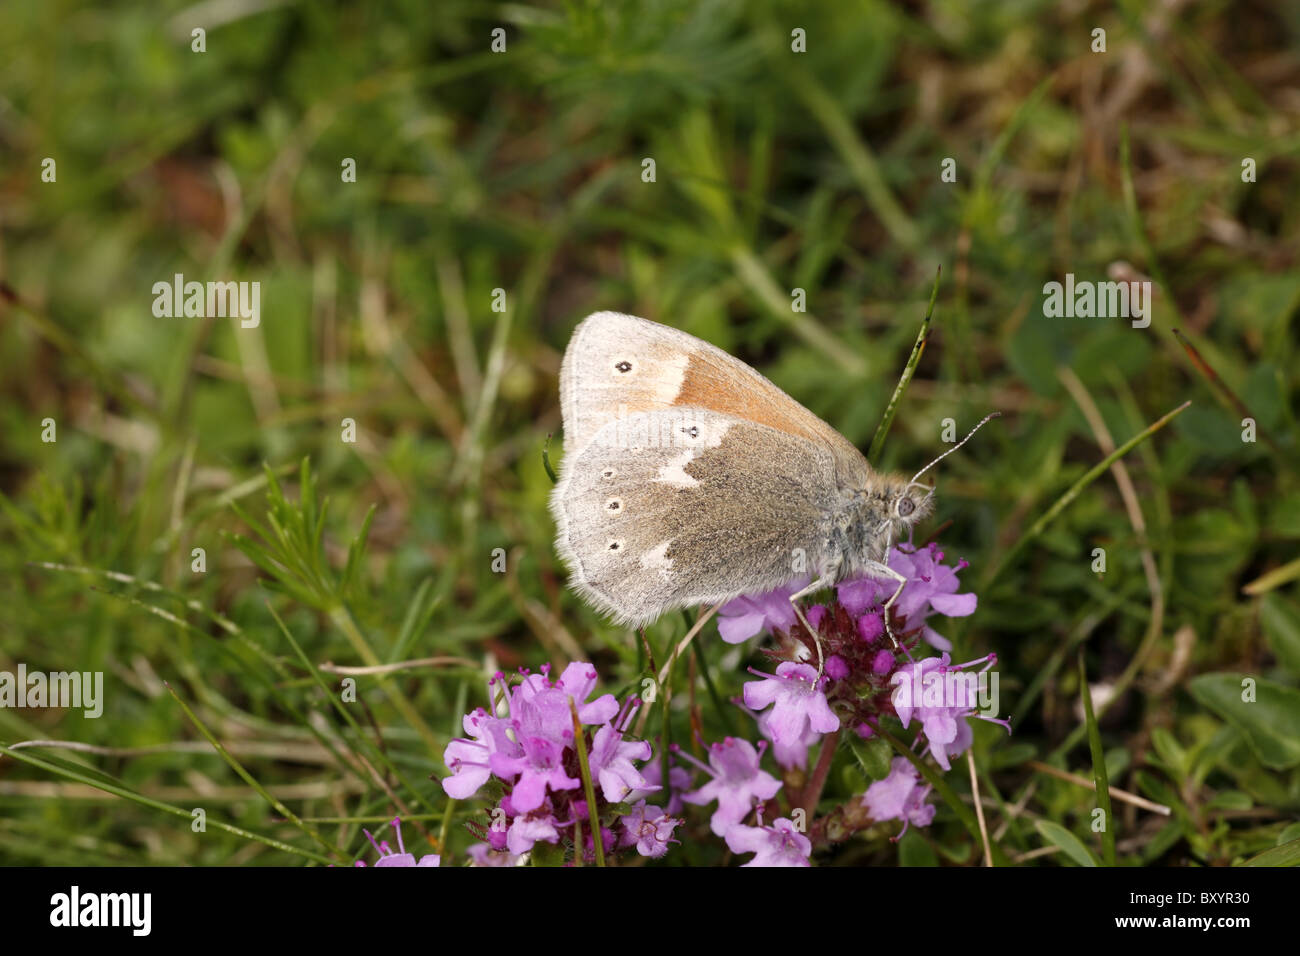 Large Heath Butterfly, Coenonympha tullia scotica, feeding on Thyme in West Perthshire Stock Photo